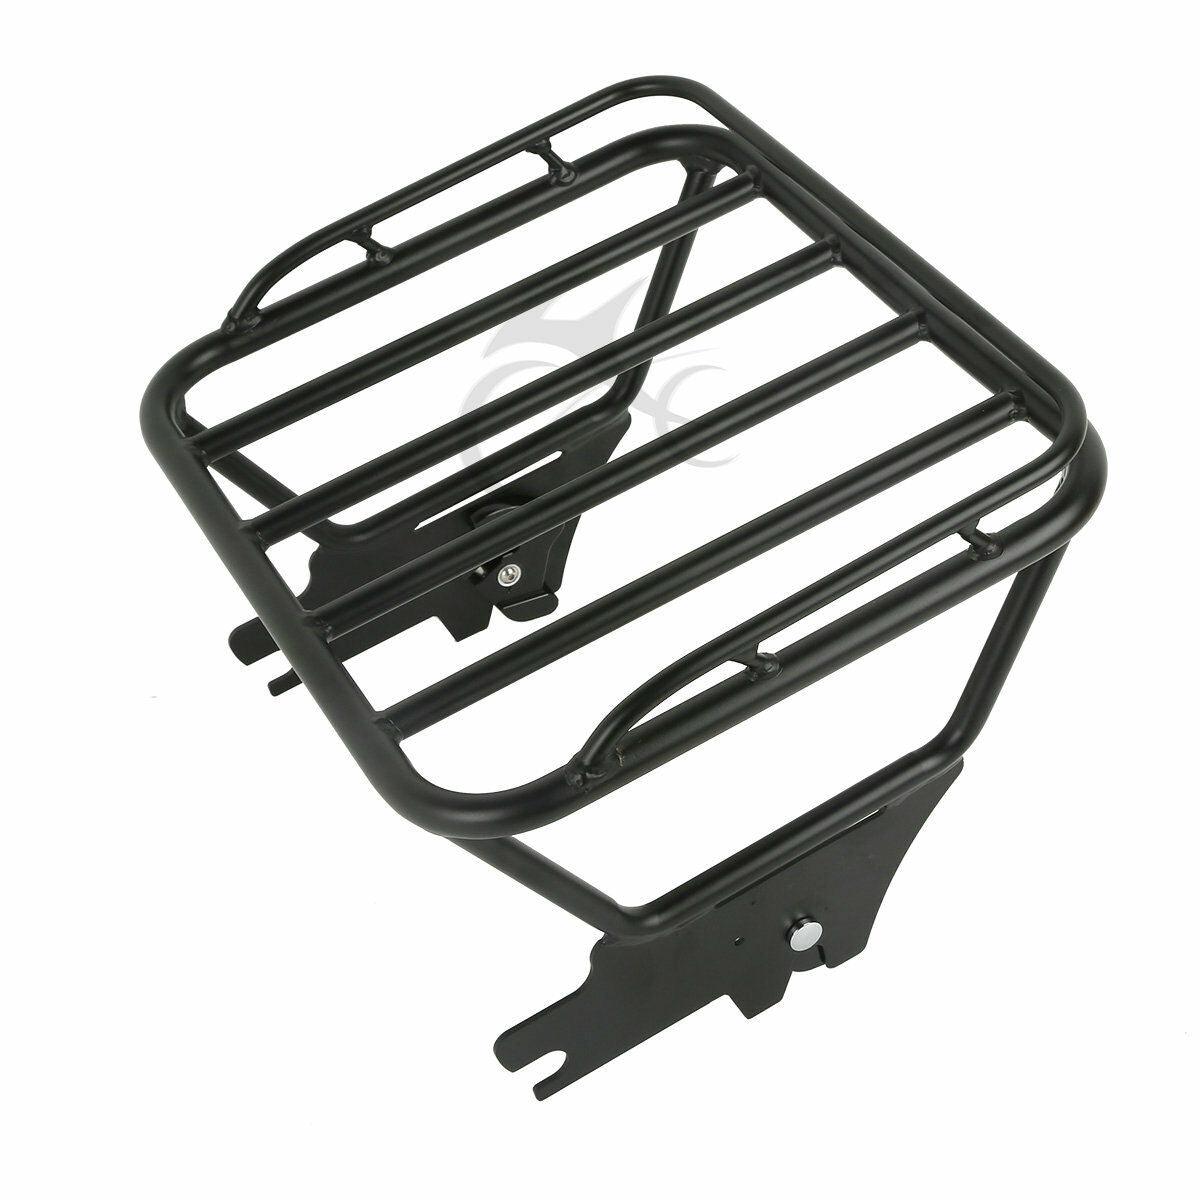 Black Two-Up Luggage Rack Fit For Harley Touring Touring Electra Glide 97-08 07 - Moto Life Products